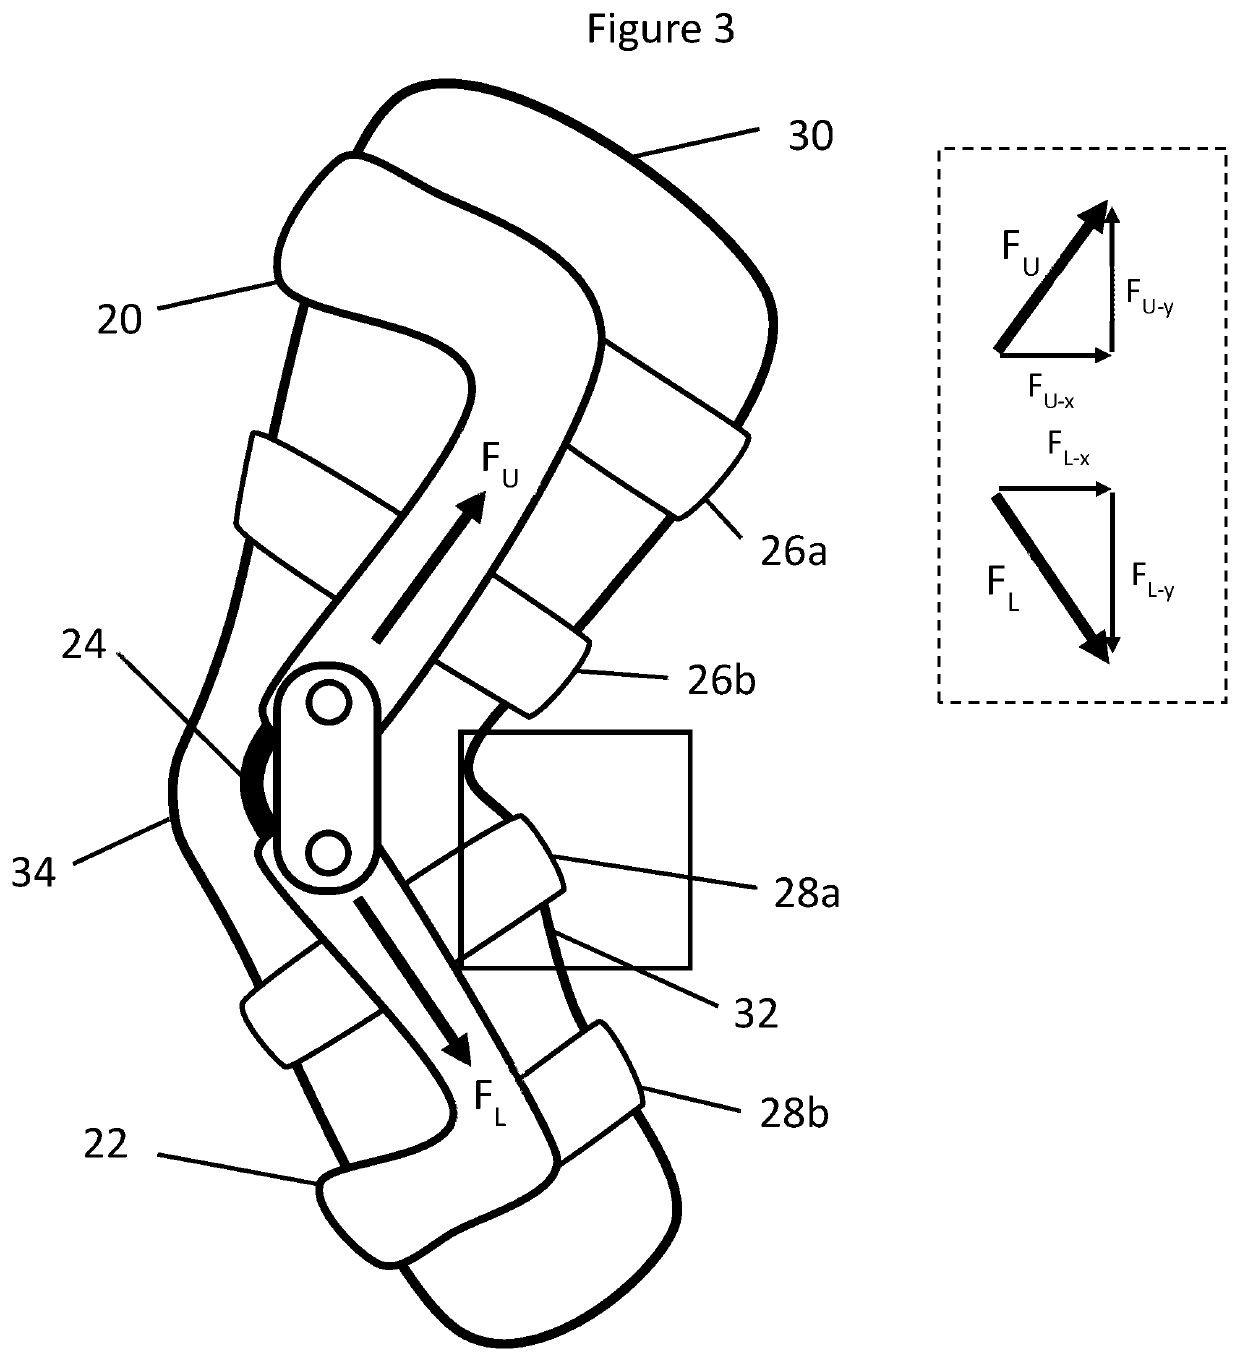 Load distribution device for preventing orthosis migration